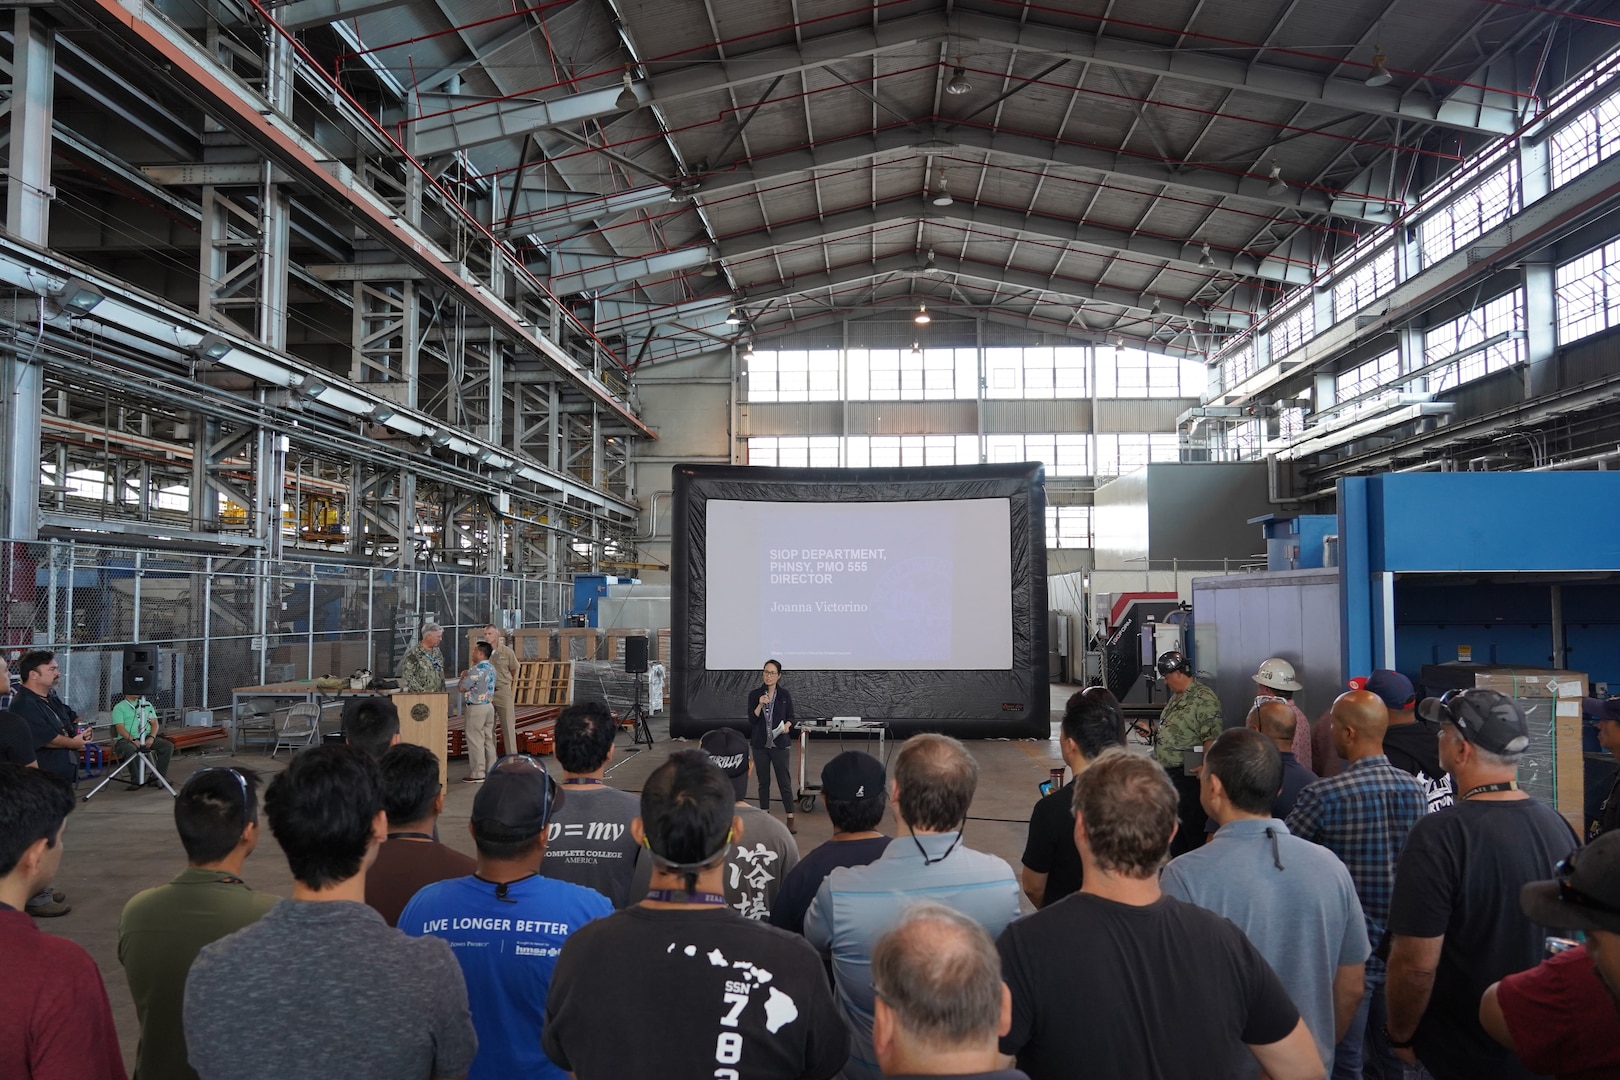 Shipyard Infrastructure Optimization Program Department Director Joanna Victorino, center, briefs shipyard personnel during a Town Hall held at the Structural Shop at Pearl Harbor Naval Shipyard.